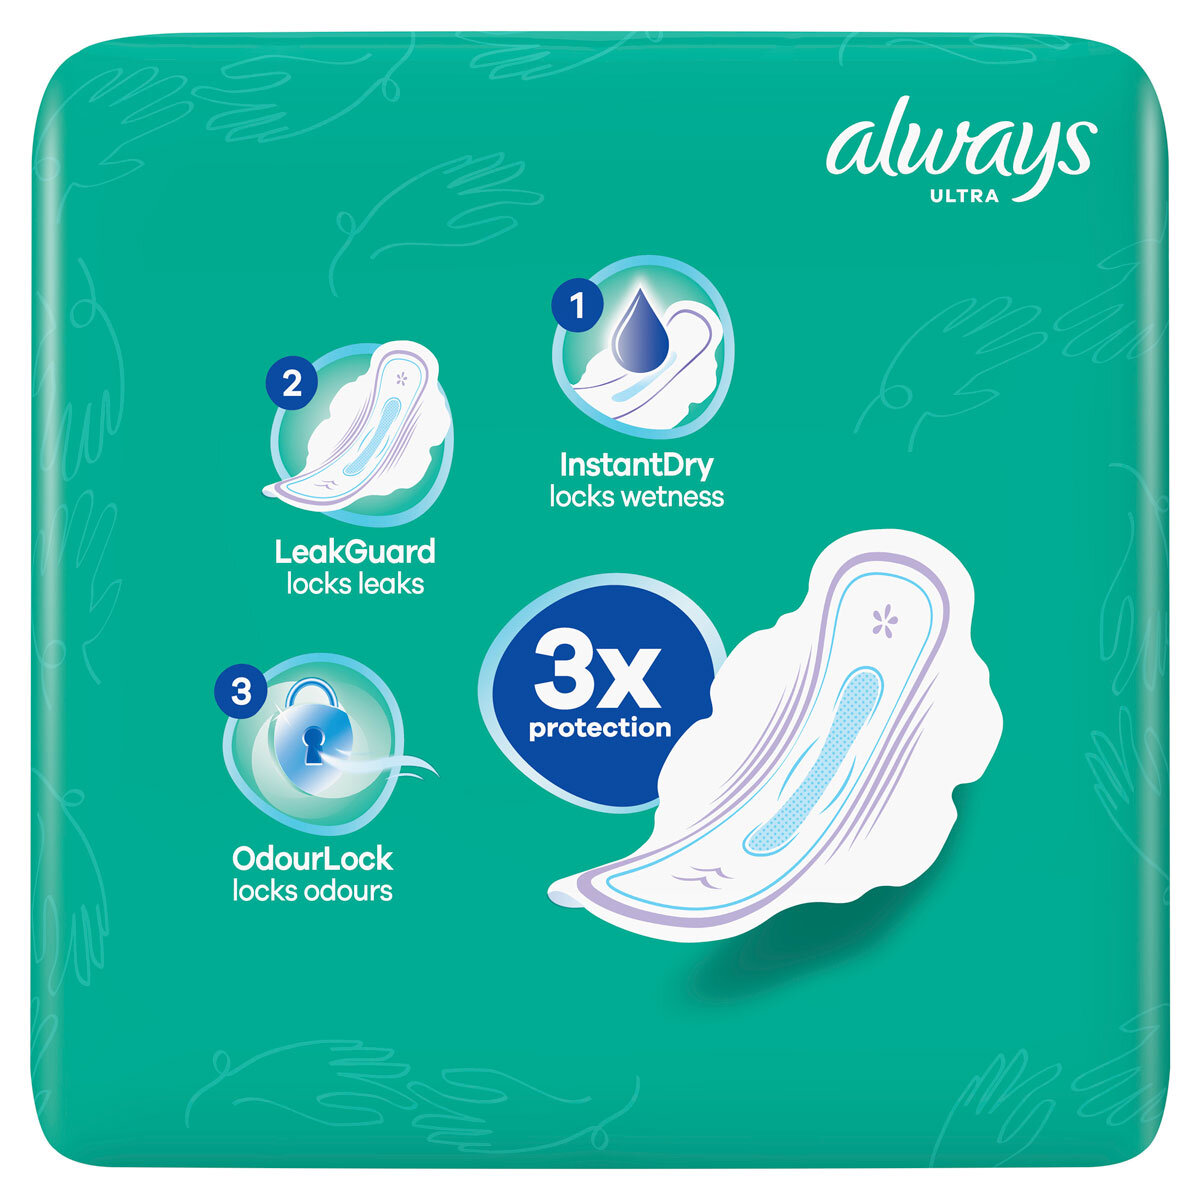 Always Ultra Normal Size 1 Sanitary Towels with Wings, 56 Pads